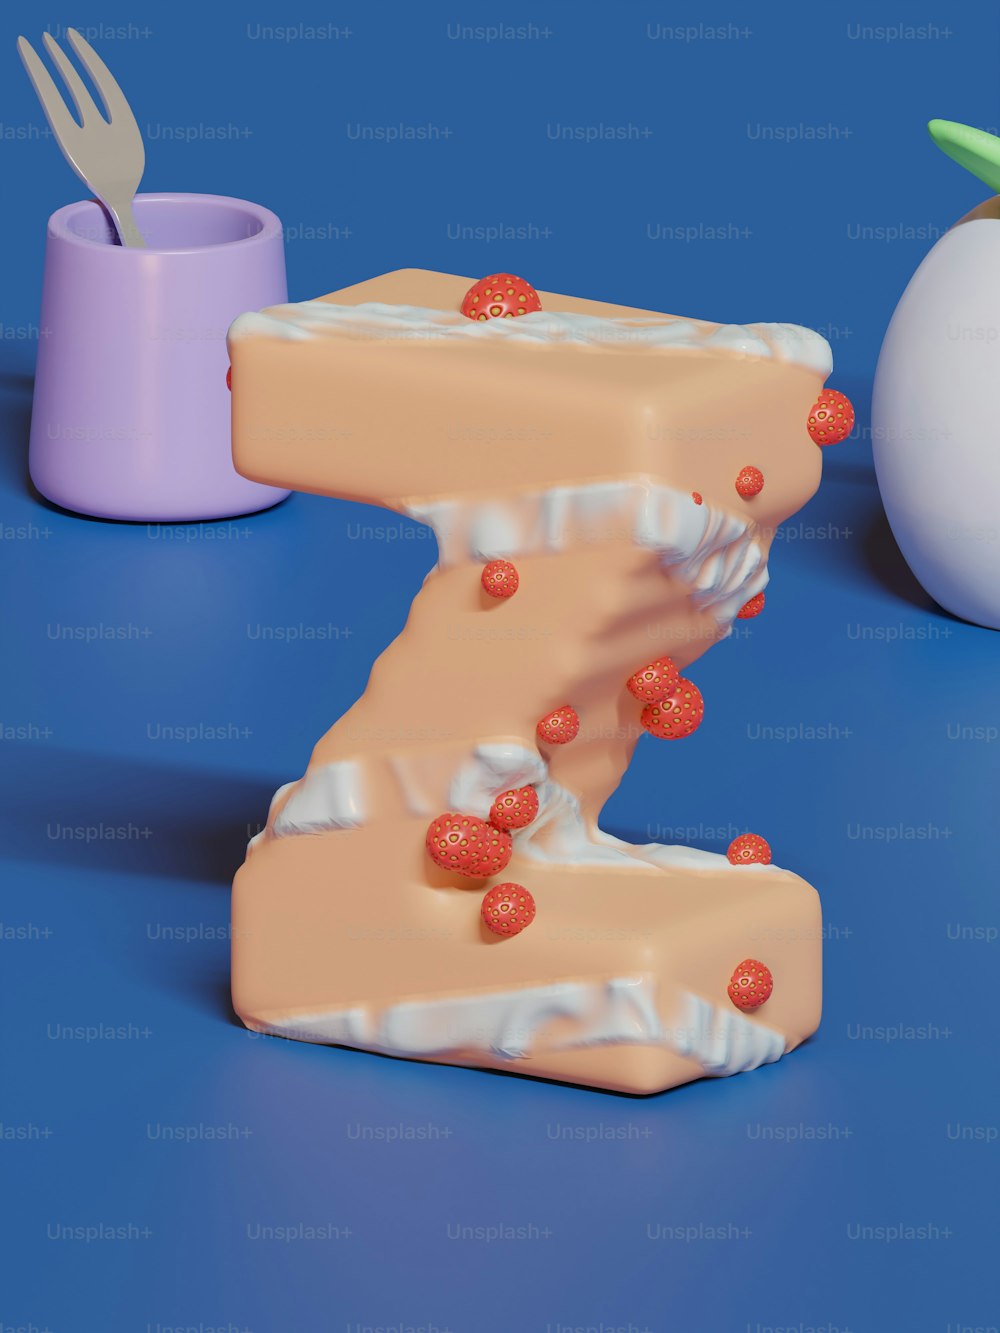 a cake shaped like the letter z next to an egg